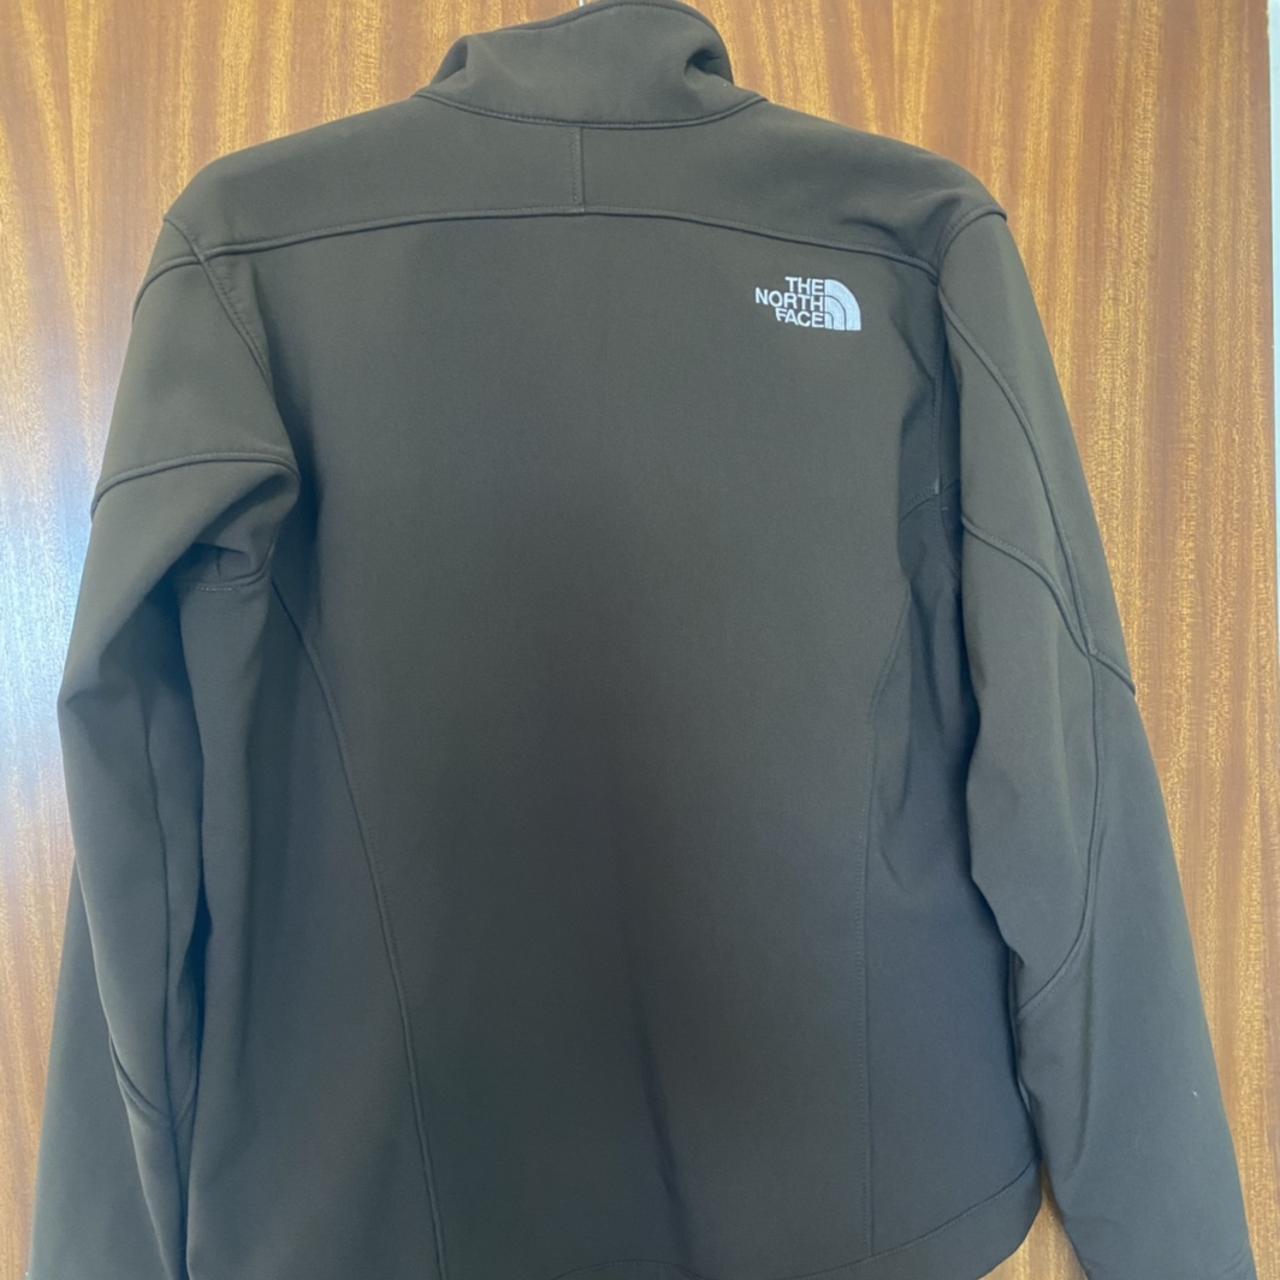 The North Face Apex Jacket - Women’s Size... - Depop